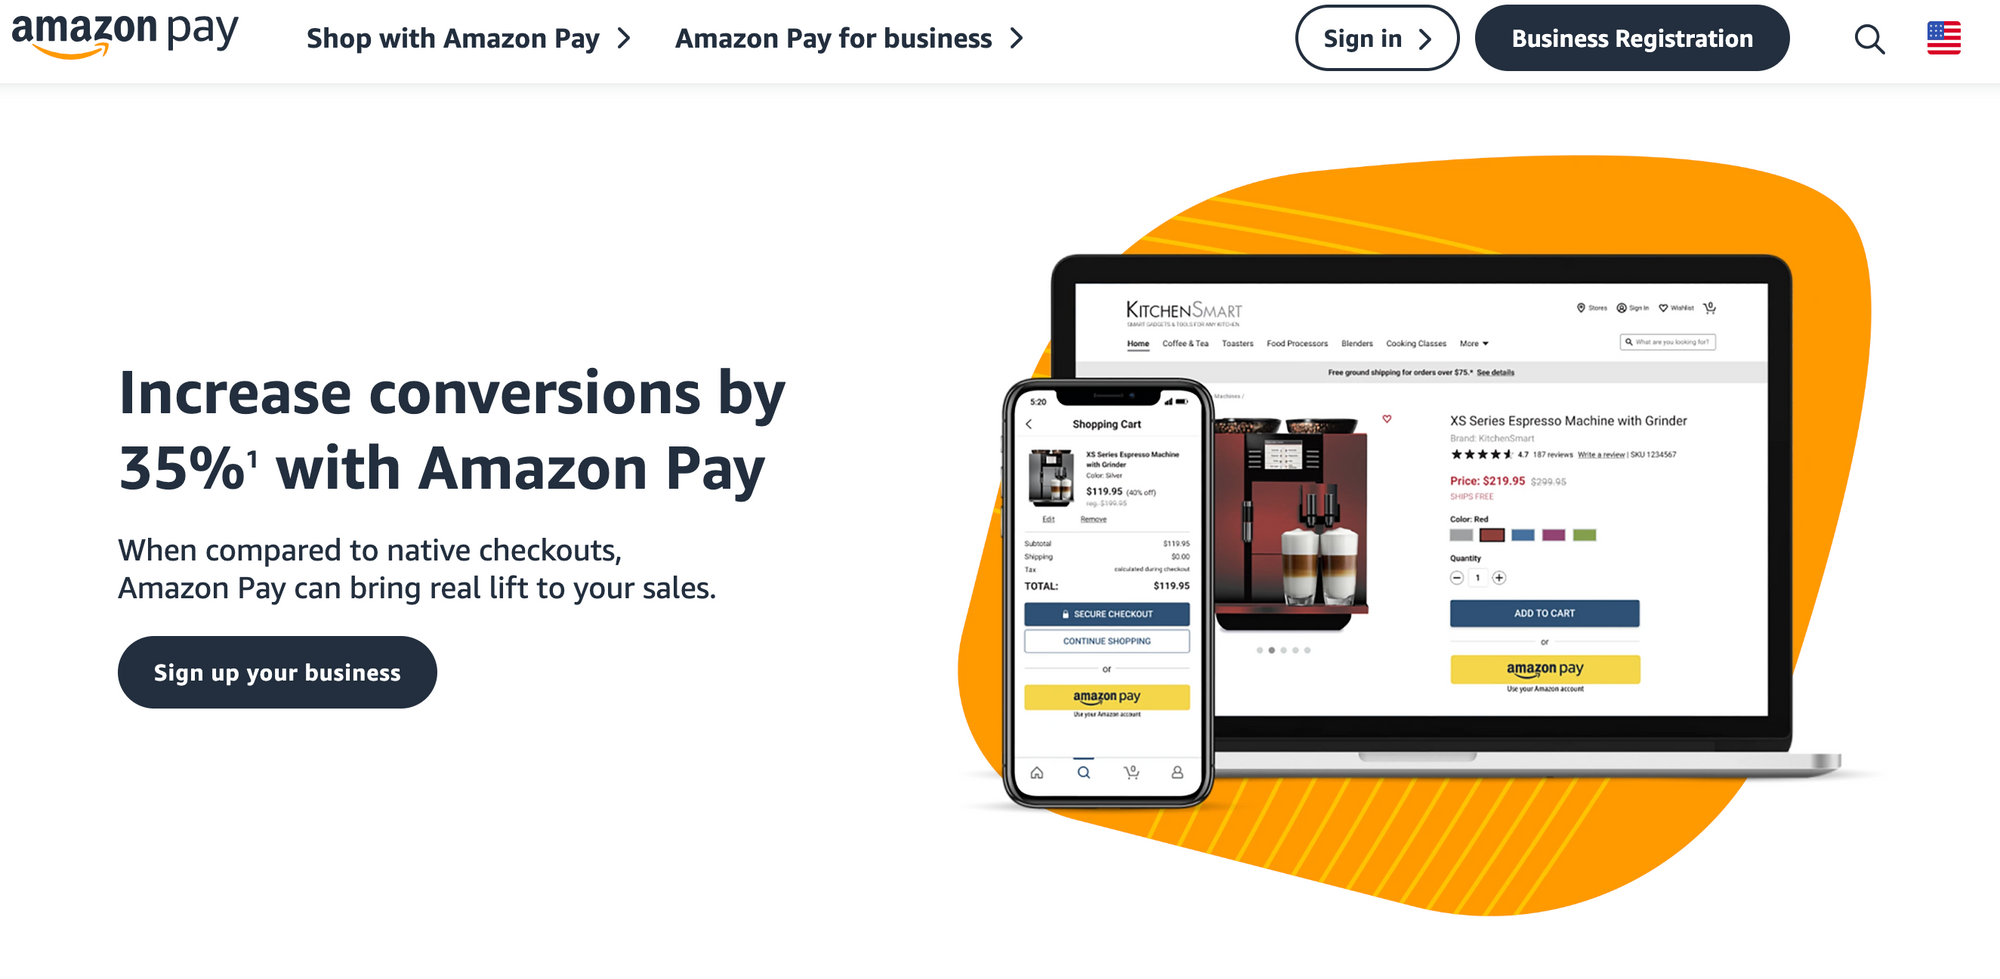 7 Top Magento Payment Gateways in 2024